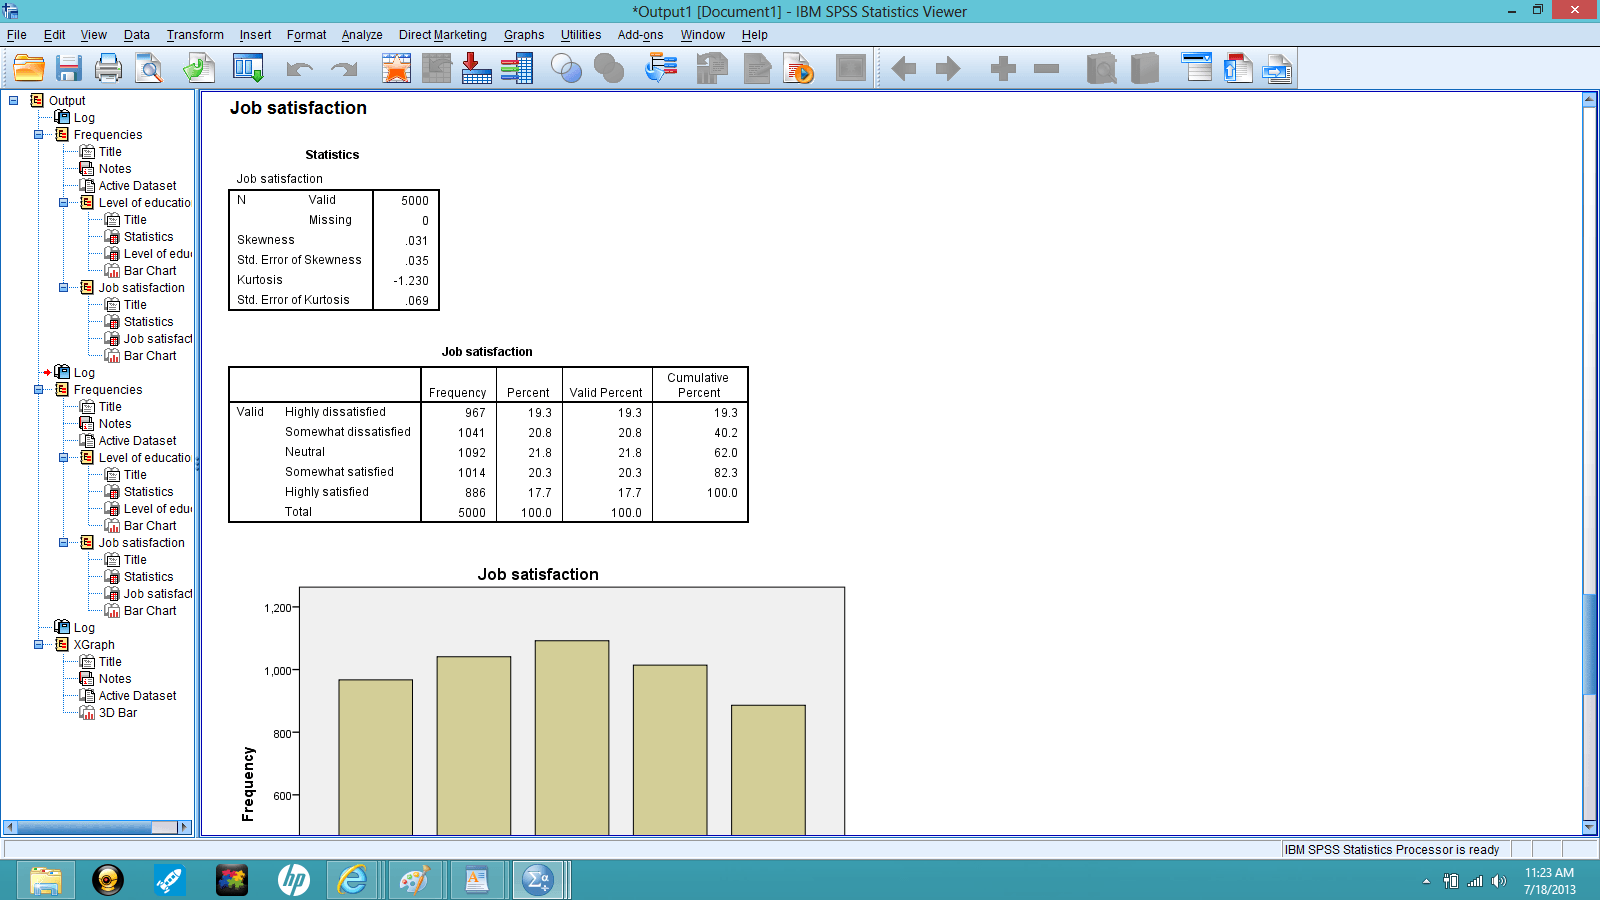 spss free download get into pc